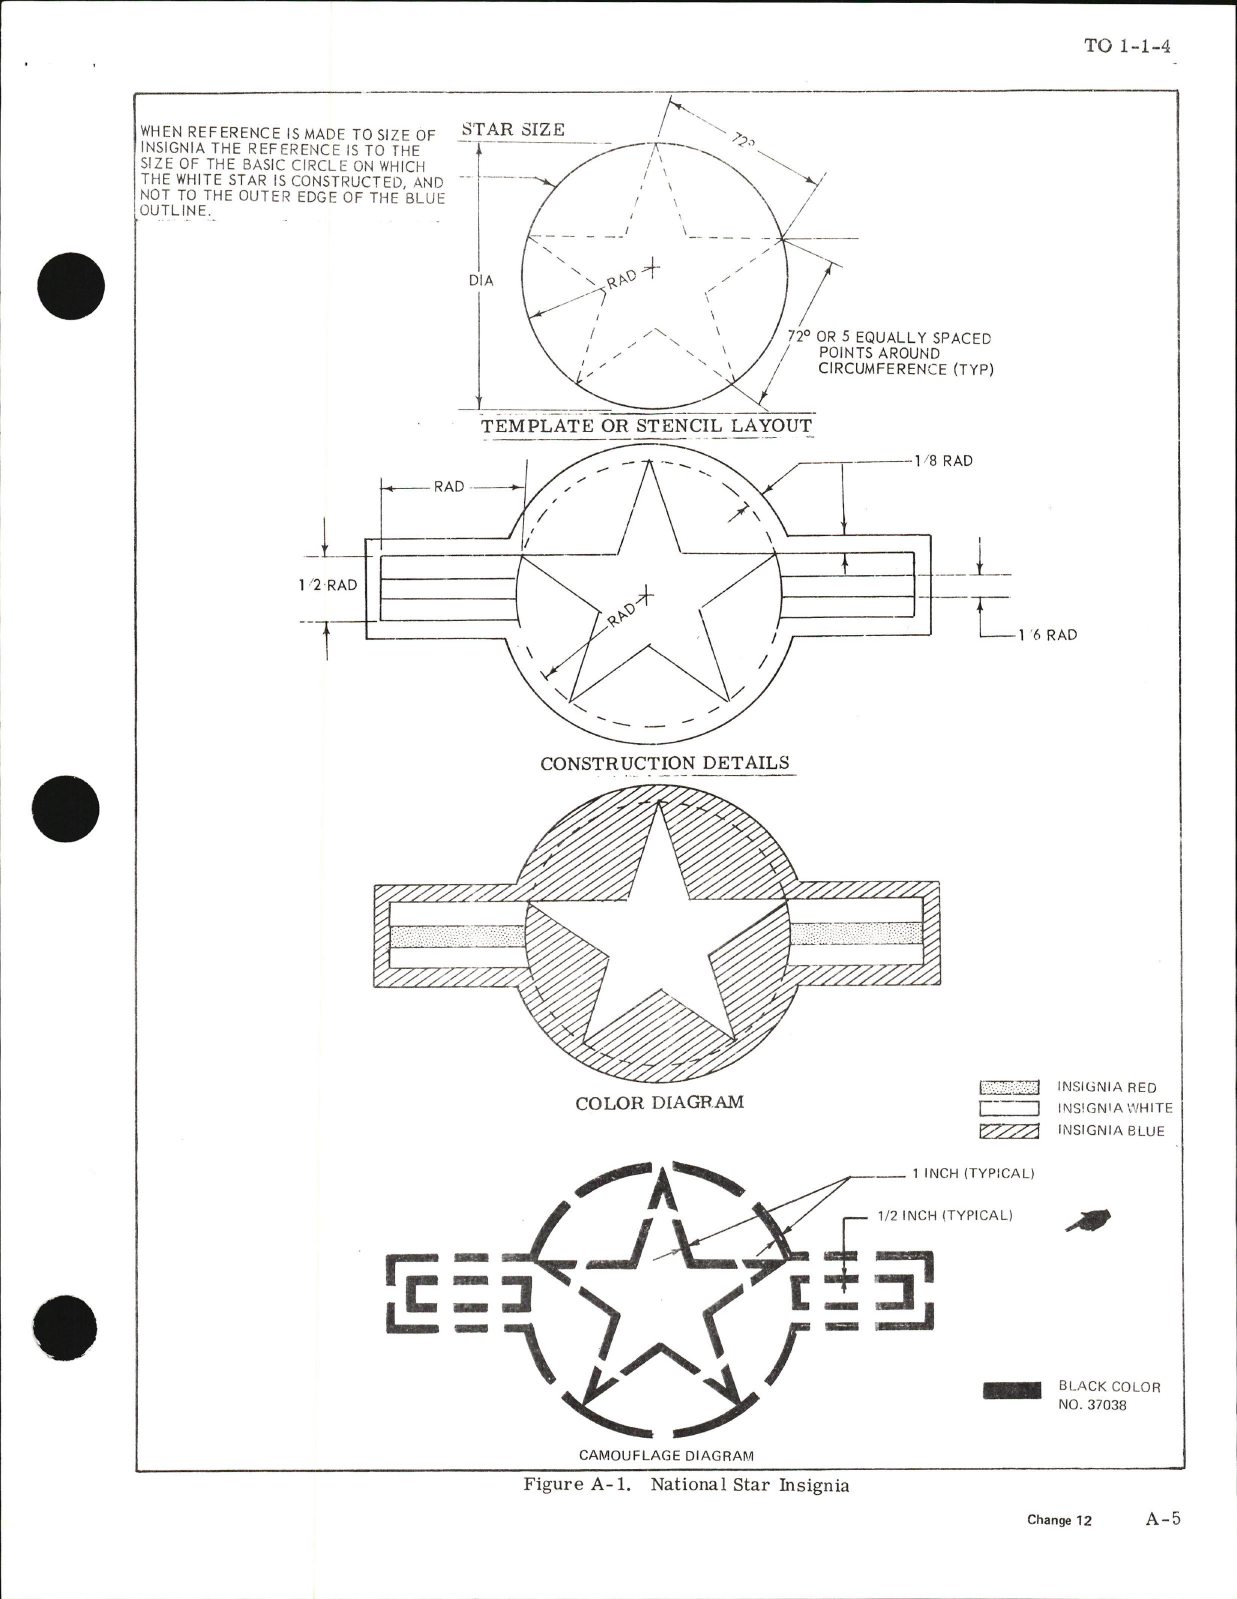 Sample page 11 from AirCorps Library document: Exterior Finishes, Insignia and Markings for USAF Aircraft - Change - 12